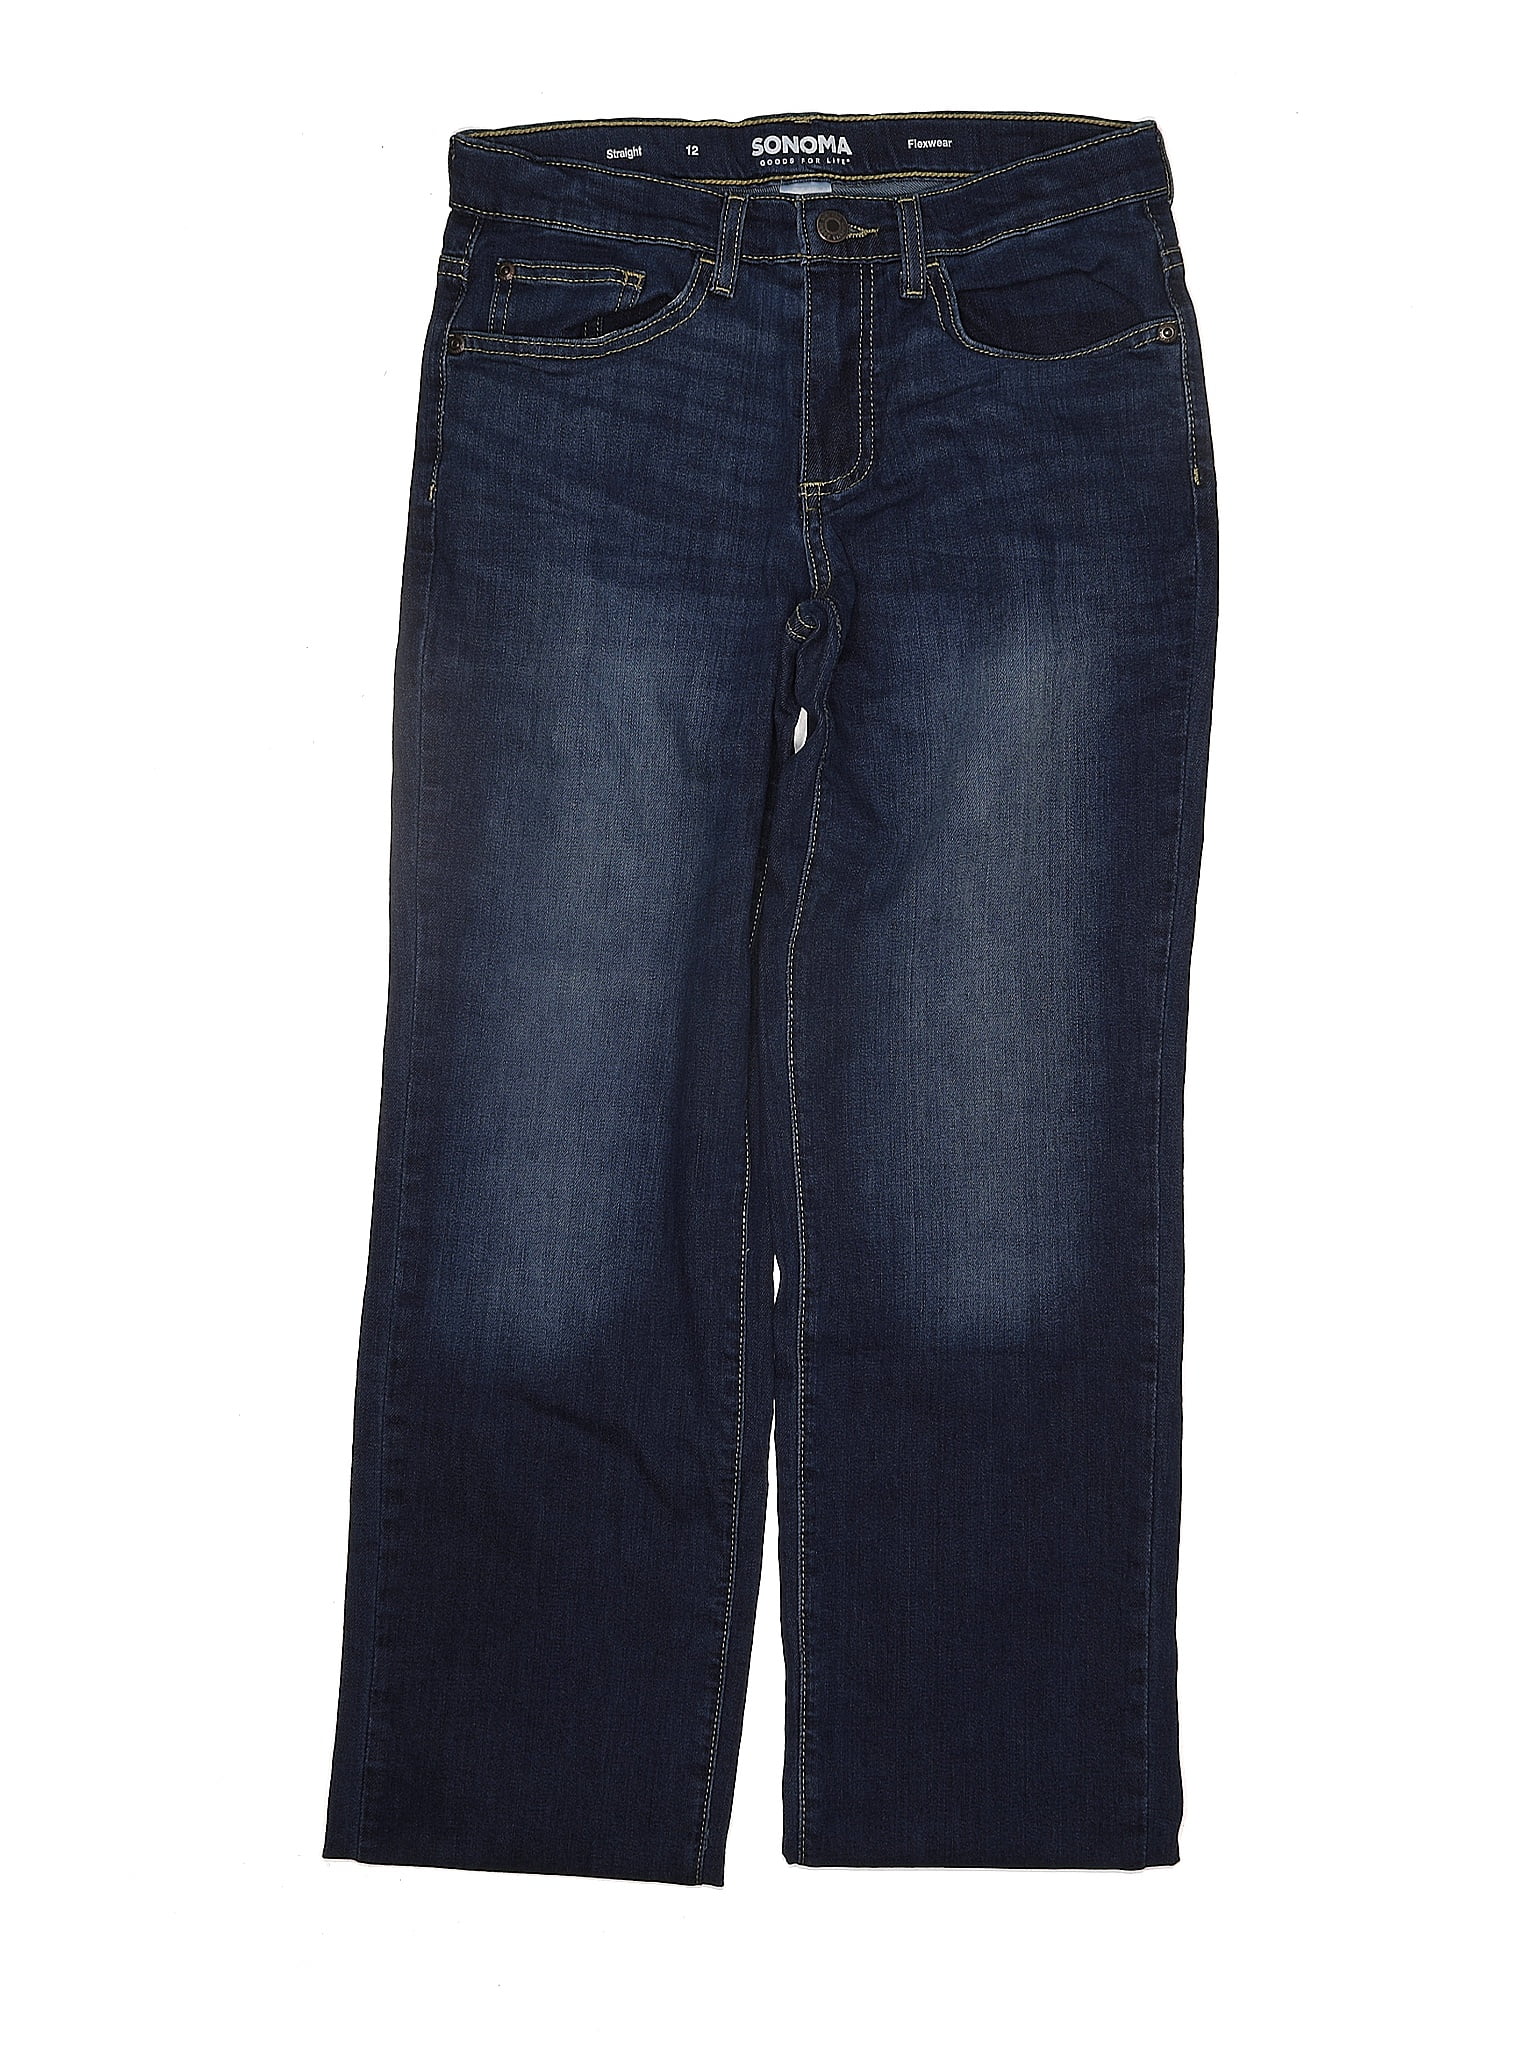 Sonoma Goods for Life Solid Blue Jeans Size 12 - 60% off